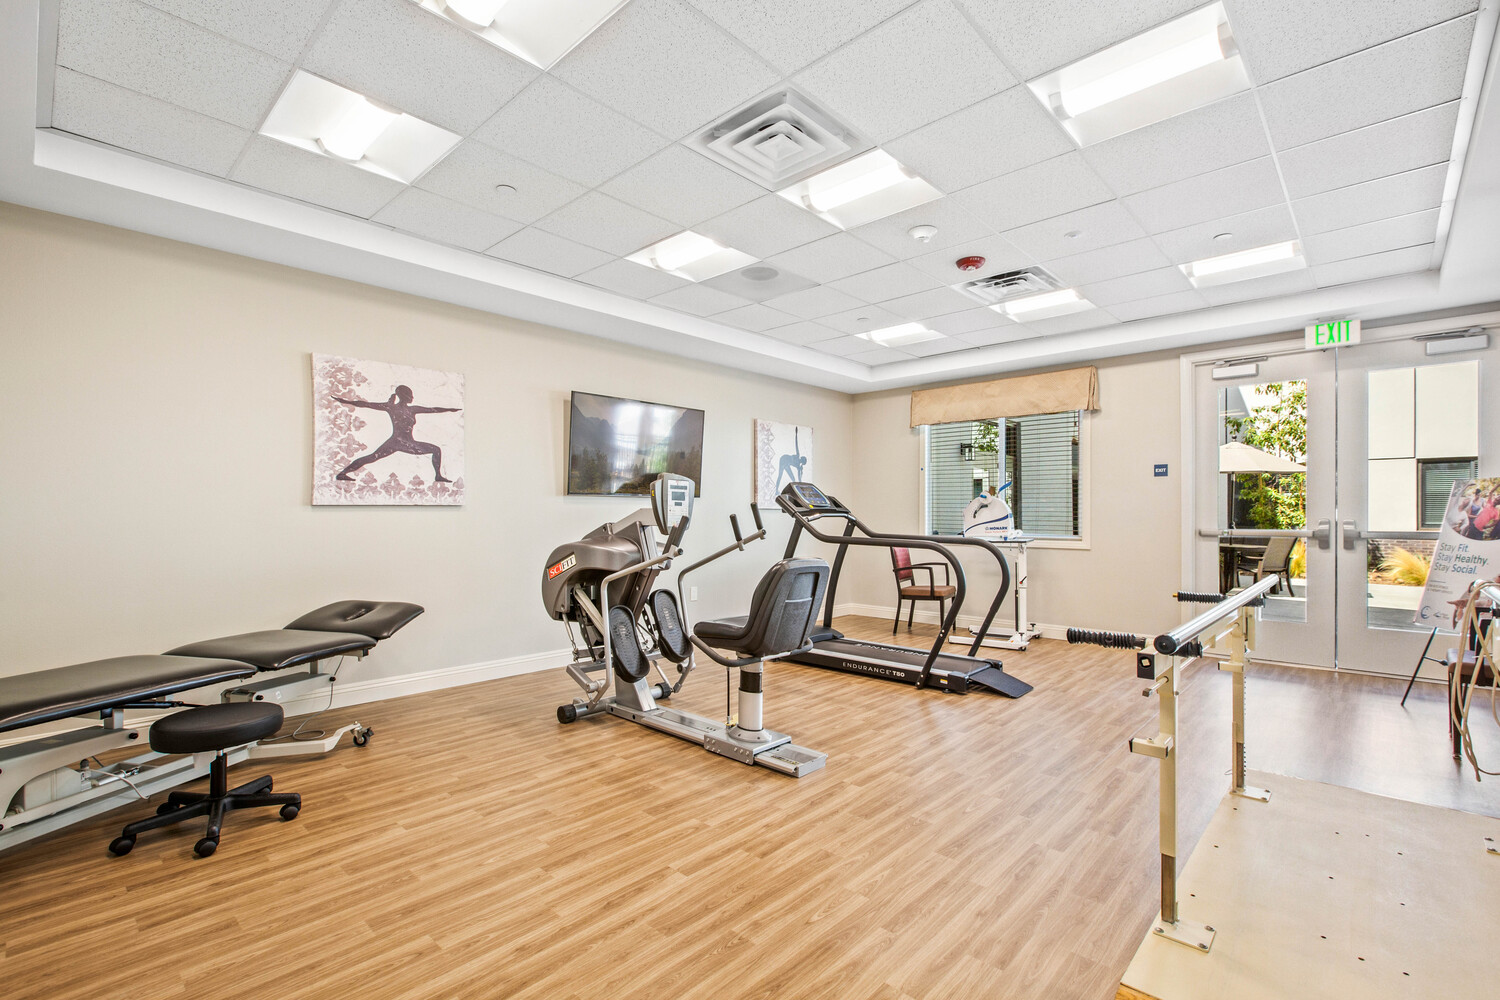 Gym with fitness equipment for assisted living residents to stay fit.